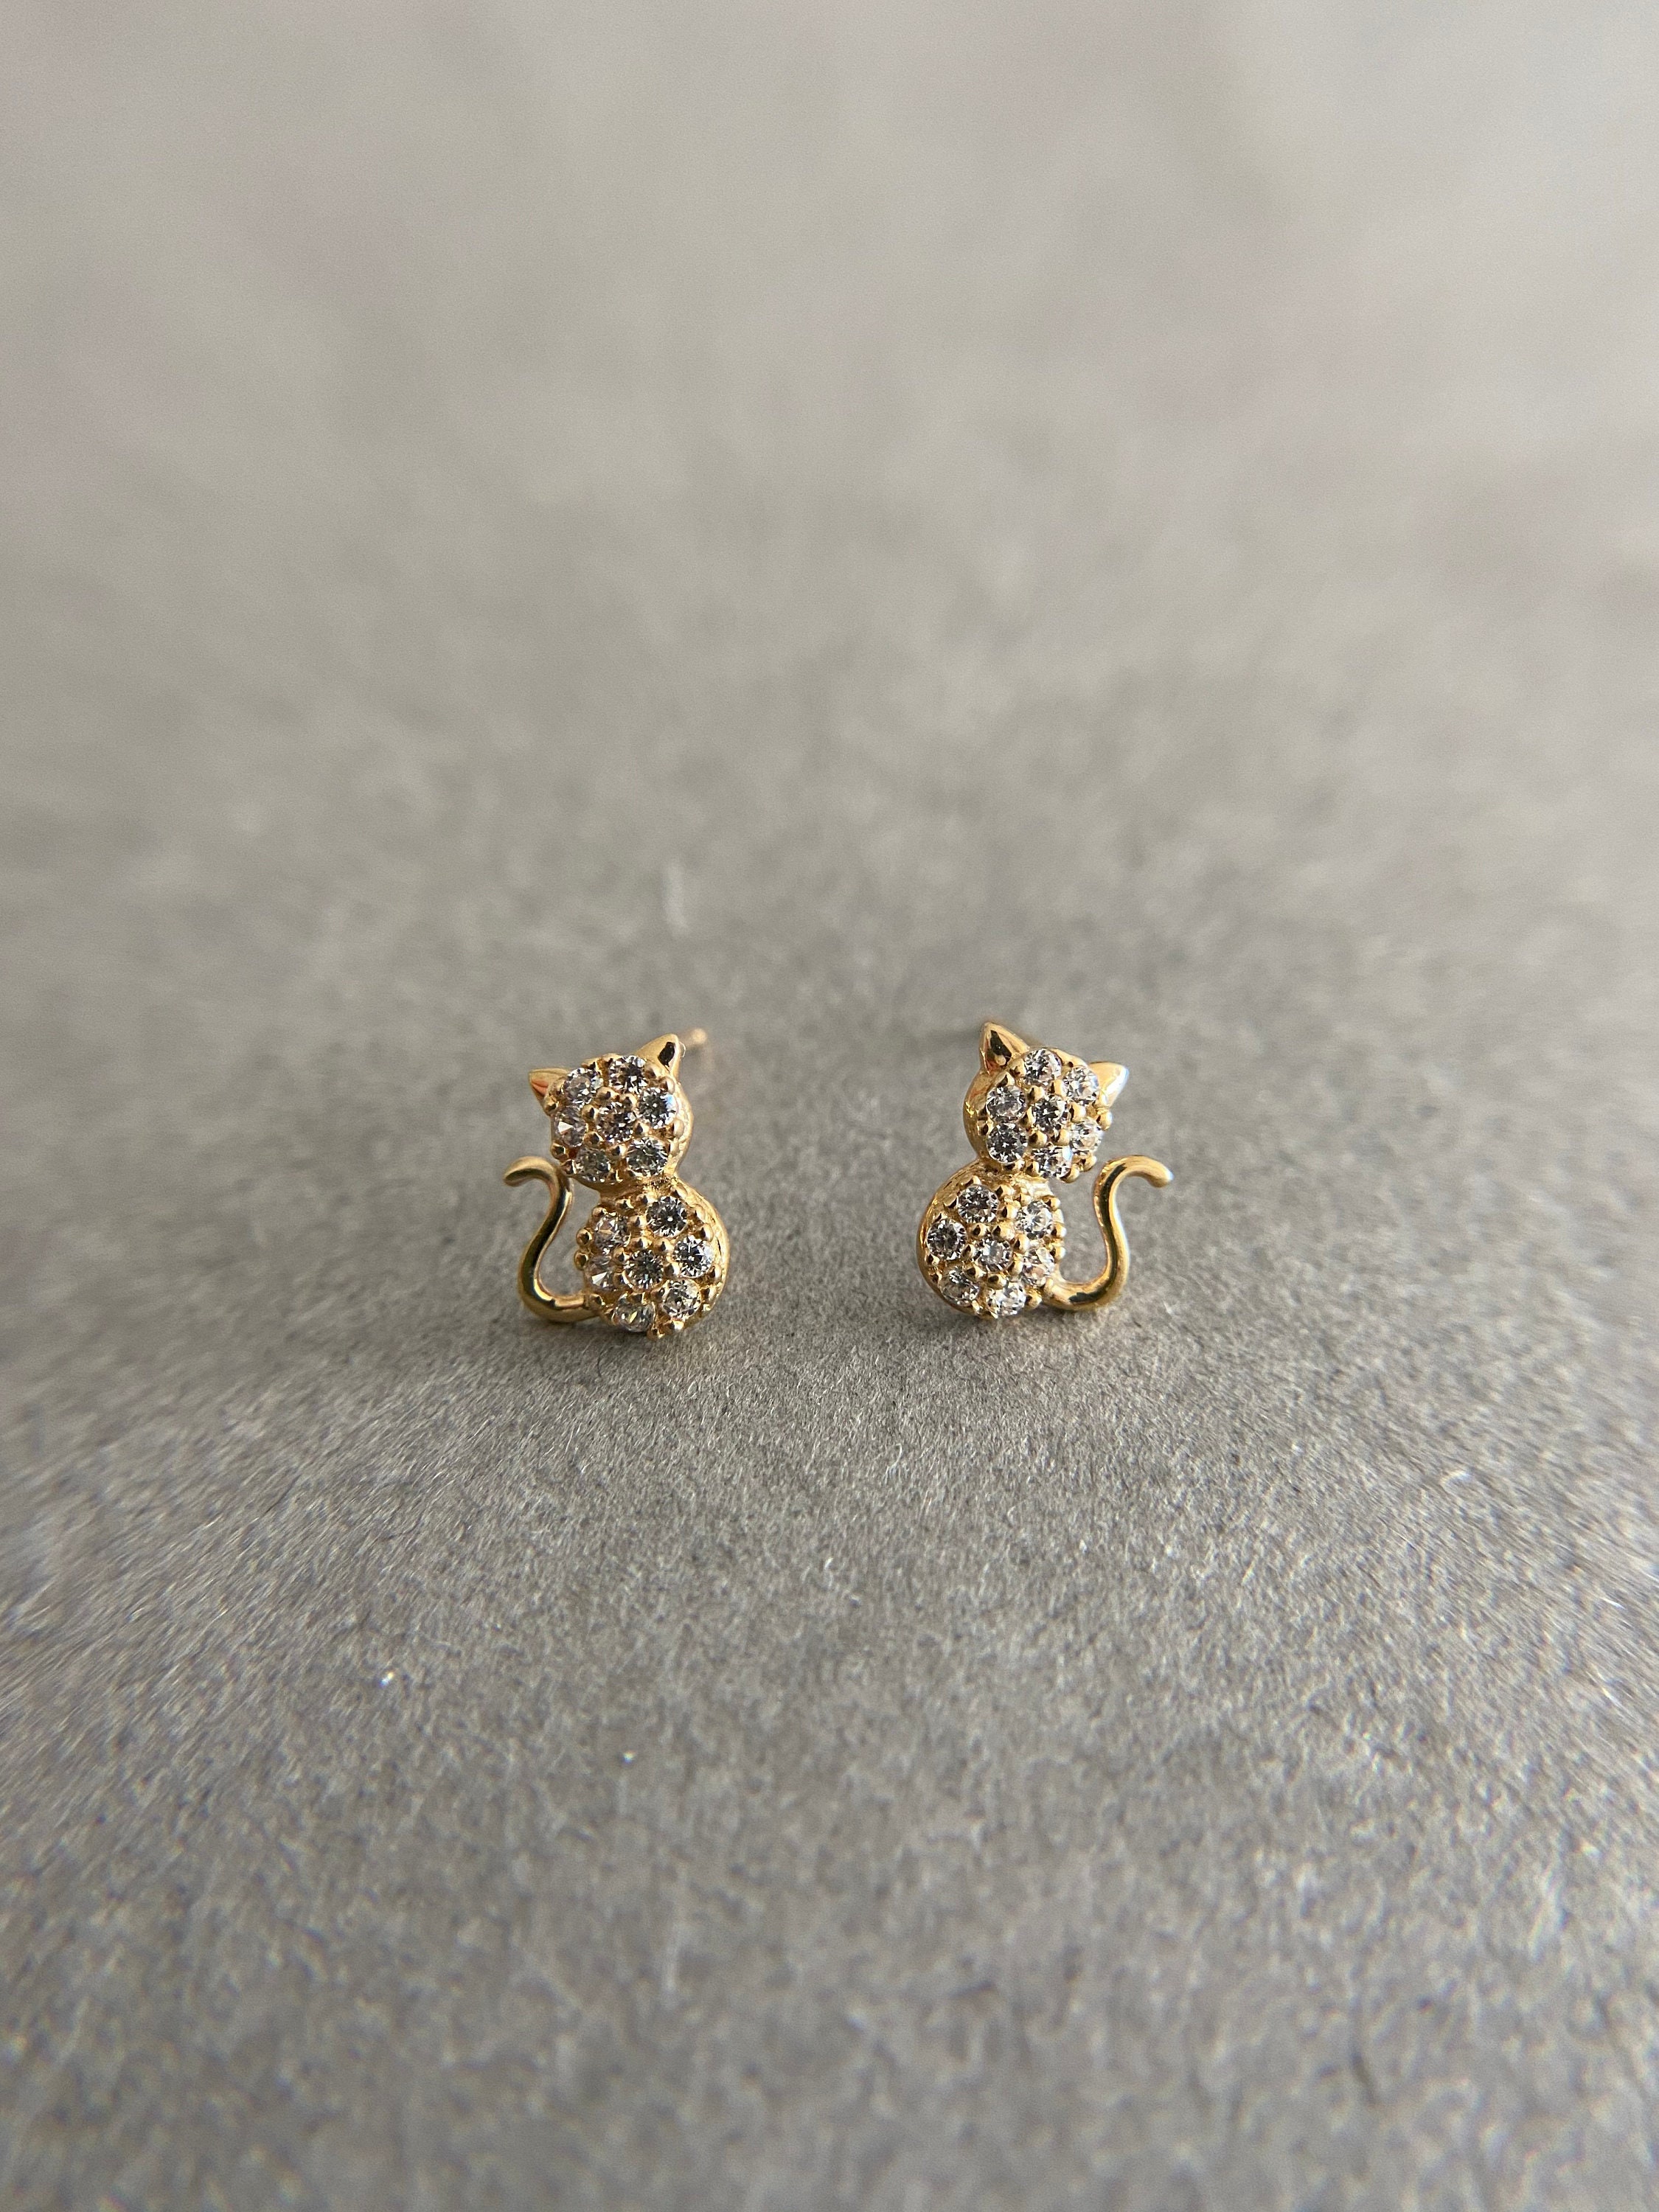 Aggregate more than 169 14k gold cat earrings best